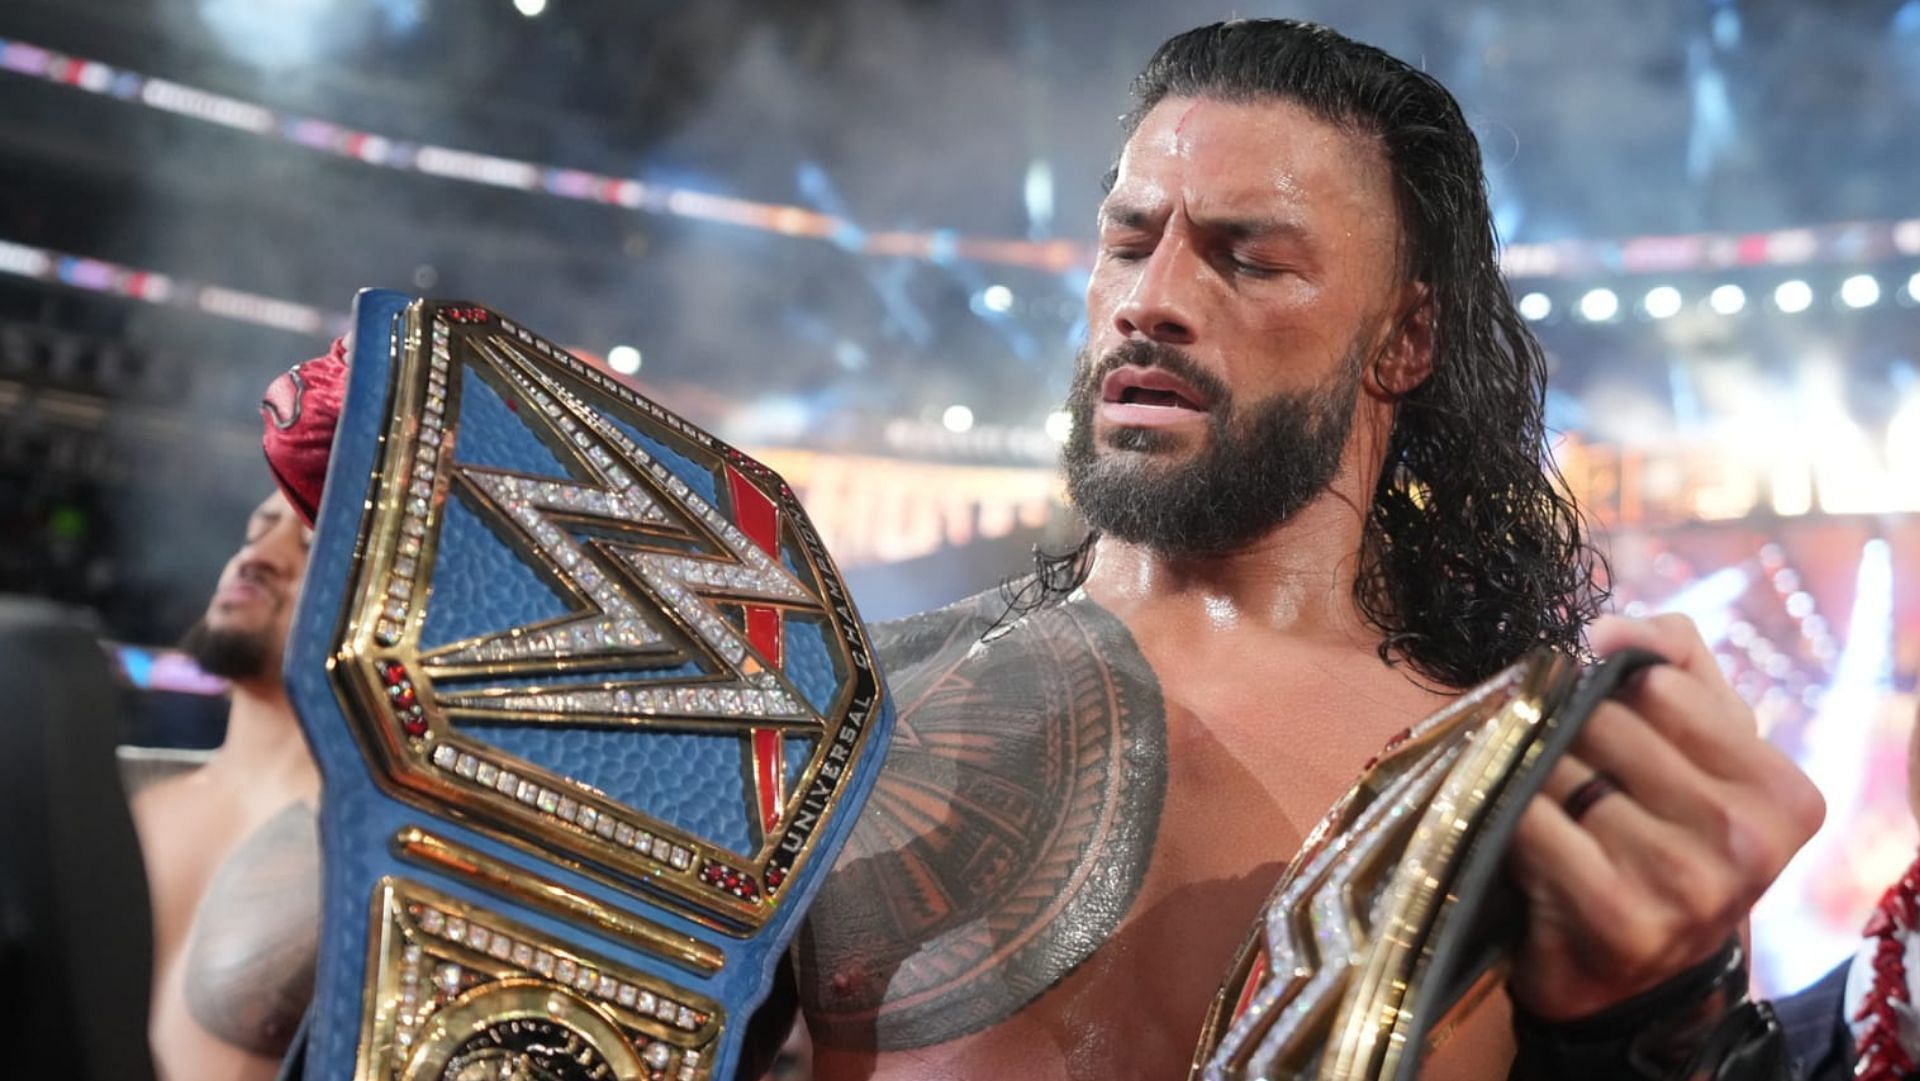 Roman Reigns reigns as the Undisputed WWE Universal Champion